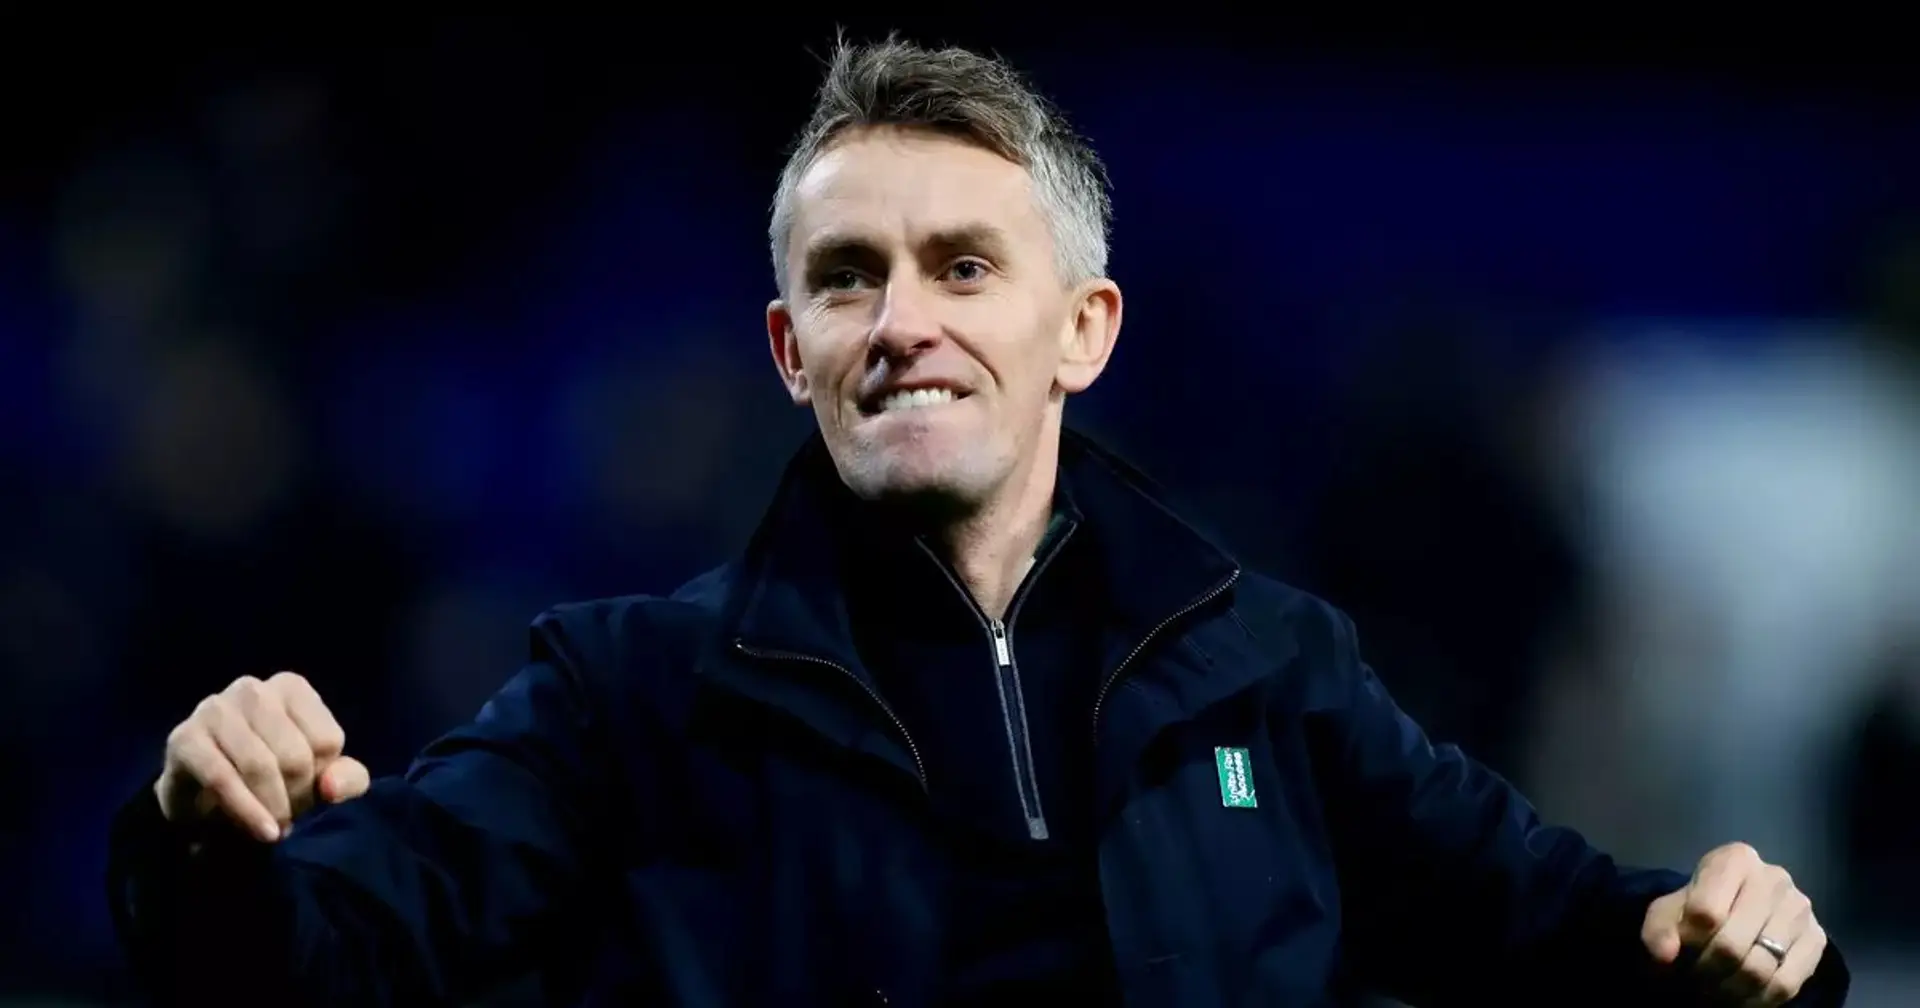 Ex-Man United coach Kieran McKenna leads Ipswich Town to Premier League — he took over in League One